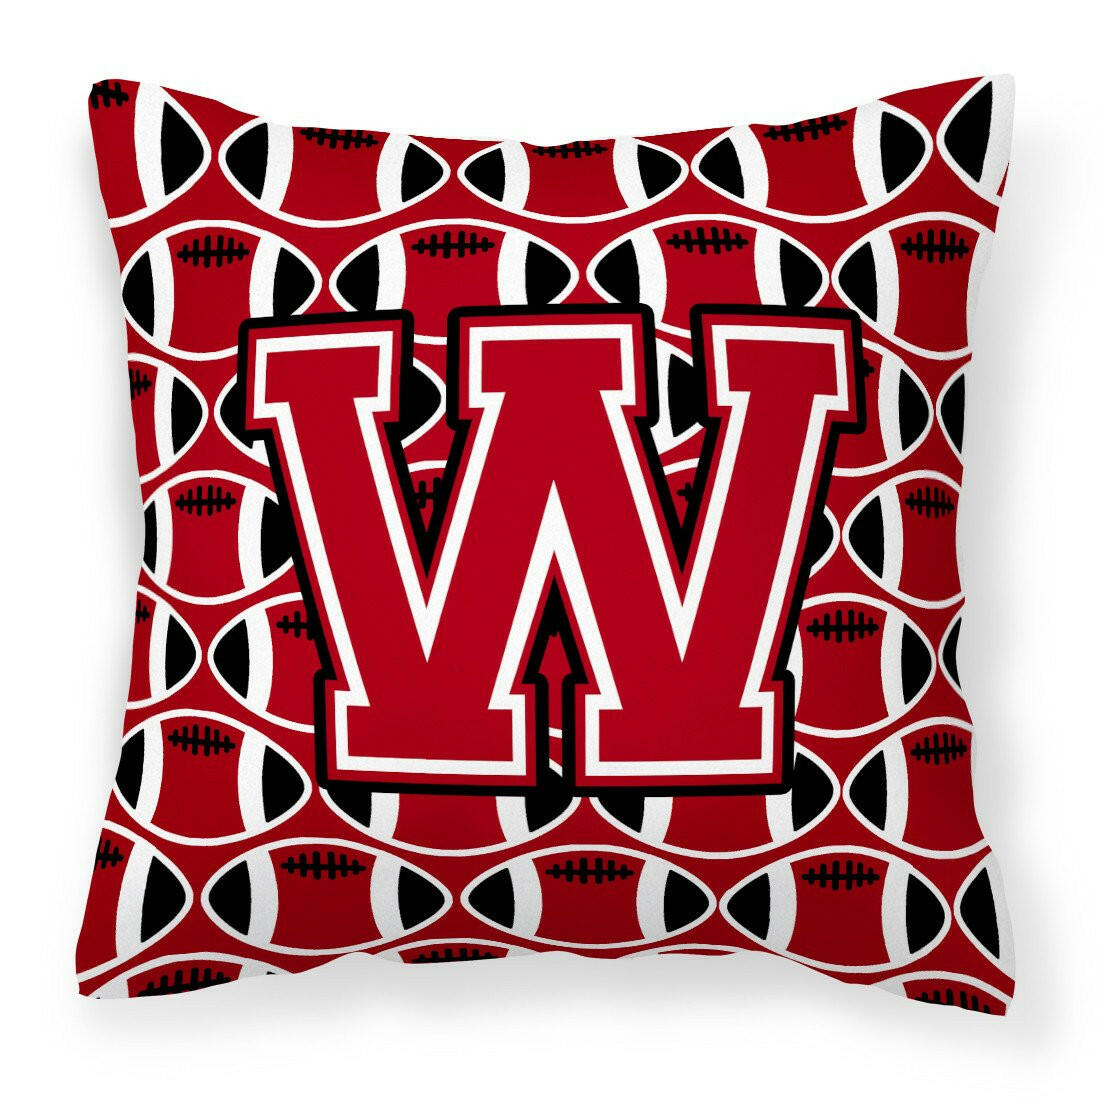 Letter W Football Red, Black and White Fabric Decorative Pillow CJ1073-WPW1414 by Caroline's Treasures